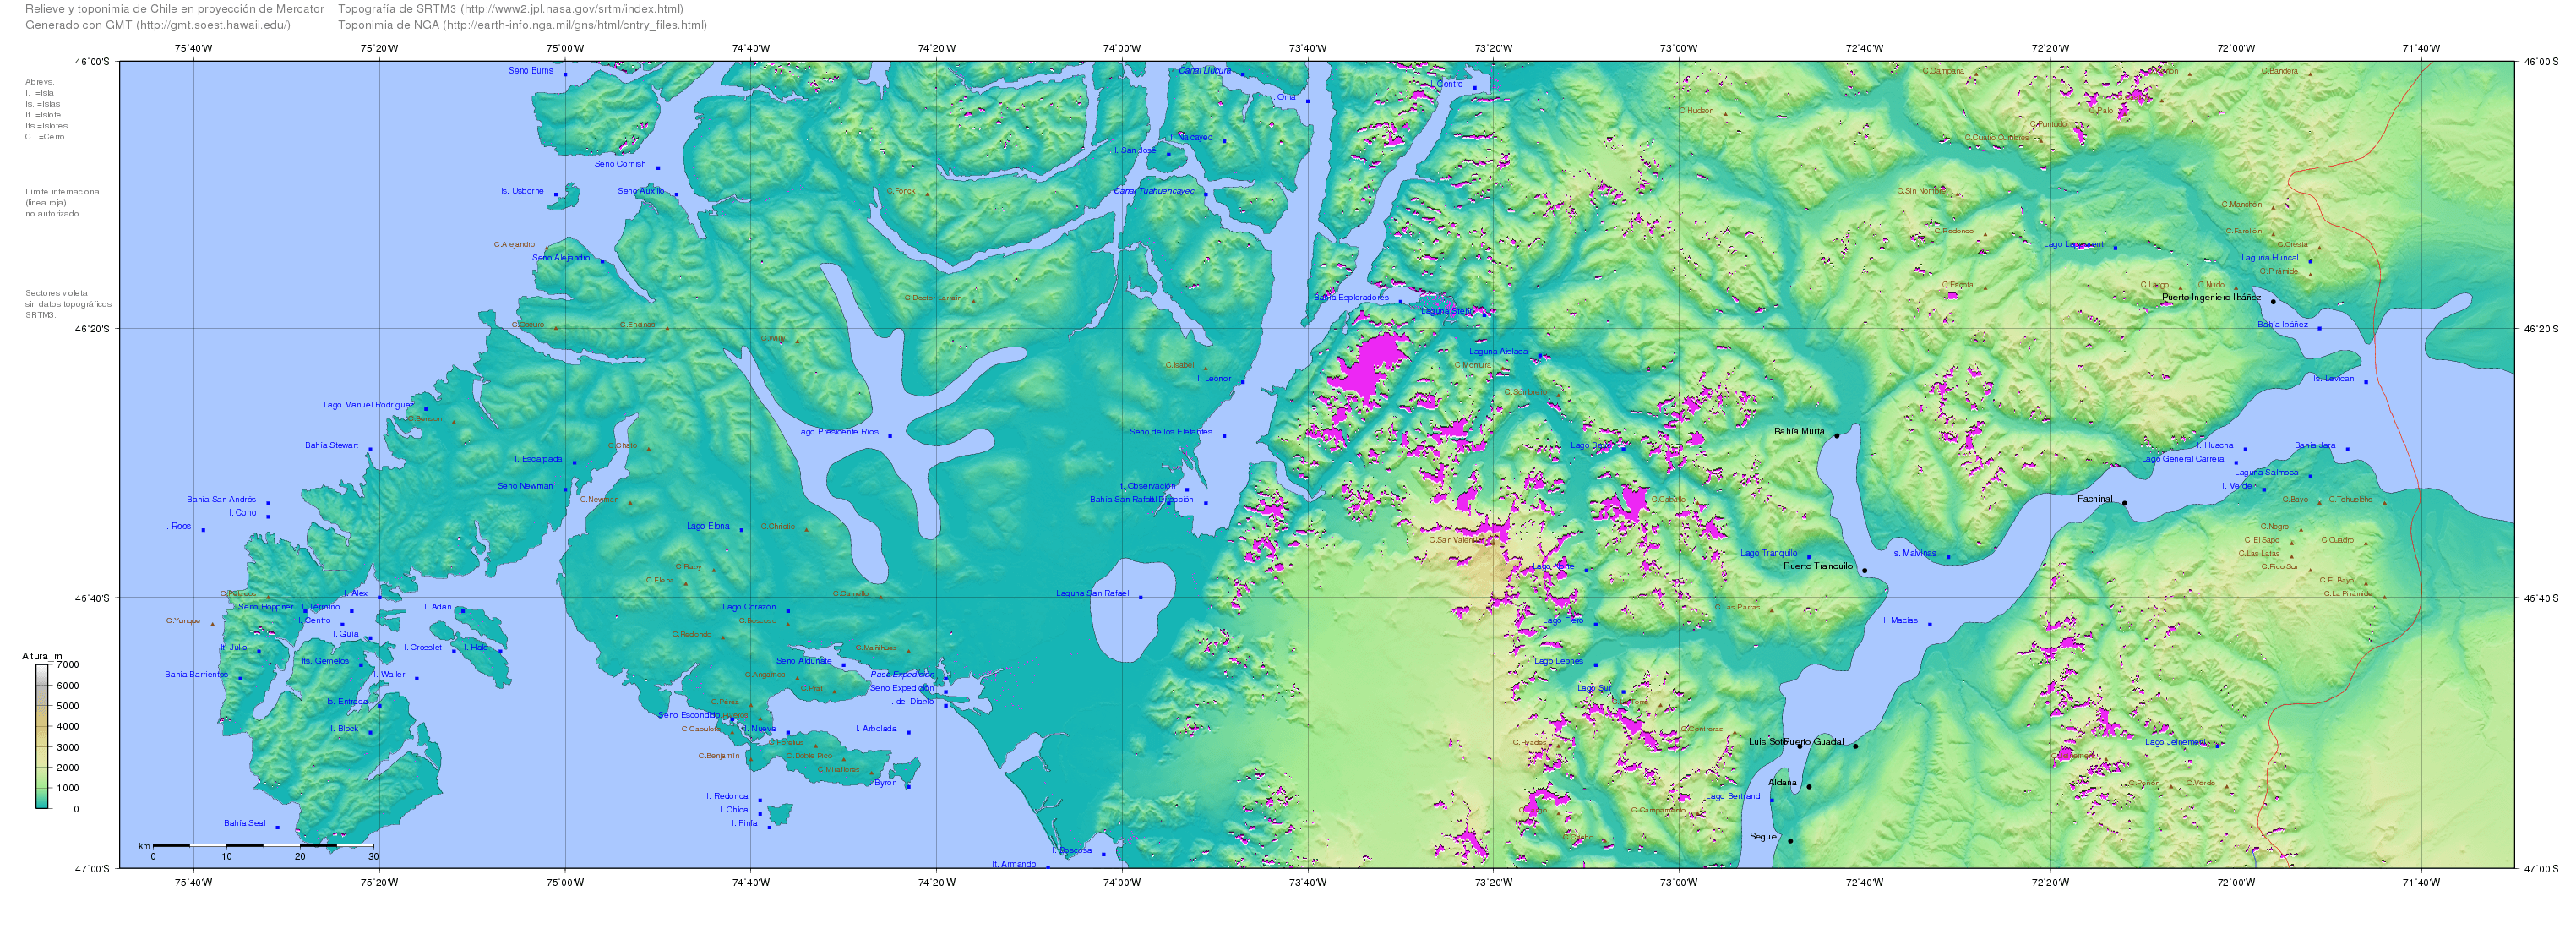 SRTM-W75.80E71.50S47.00N46.00.Chilechico.png